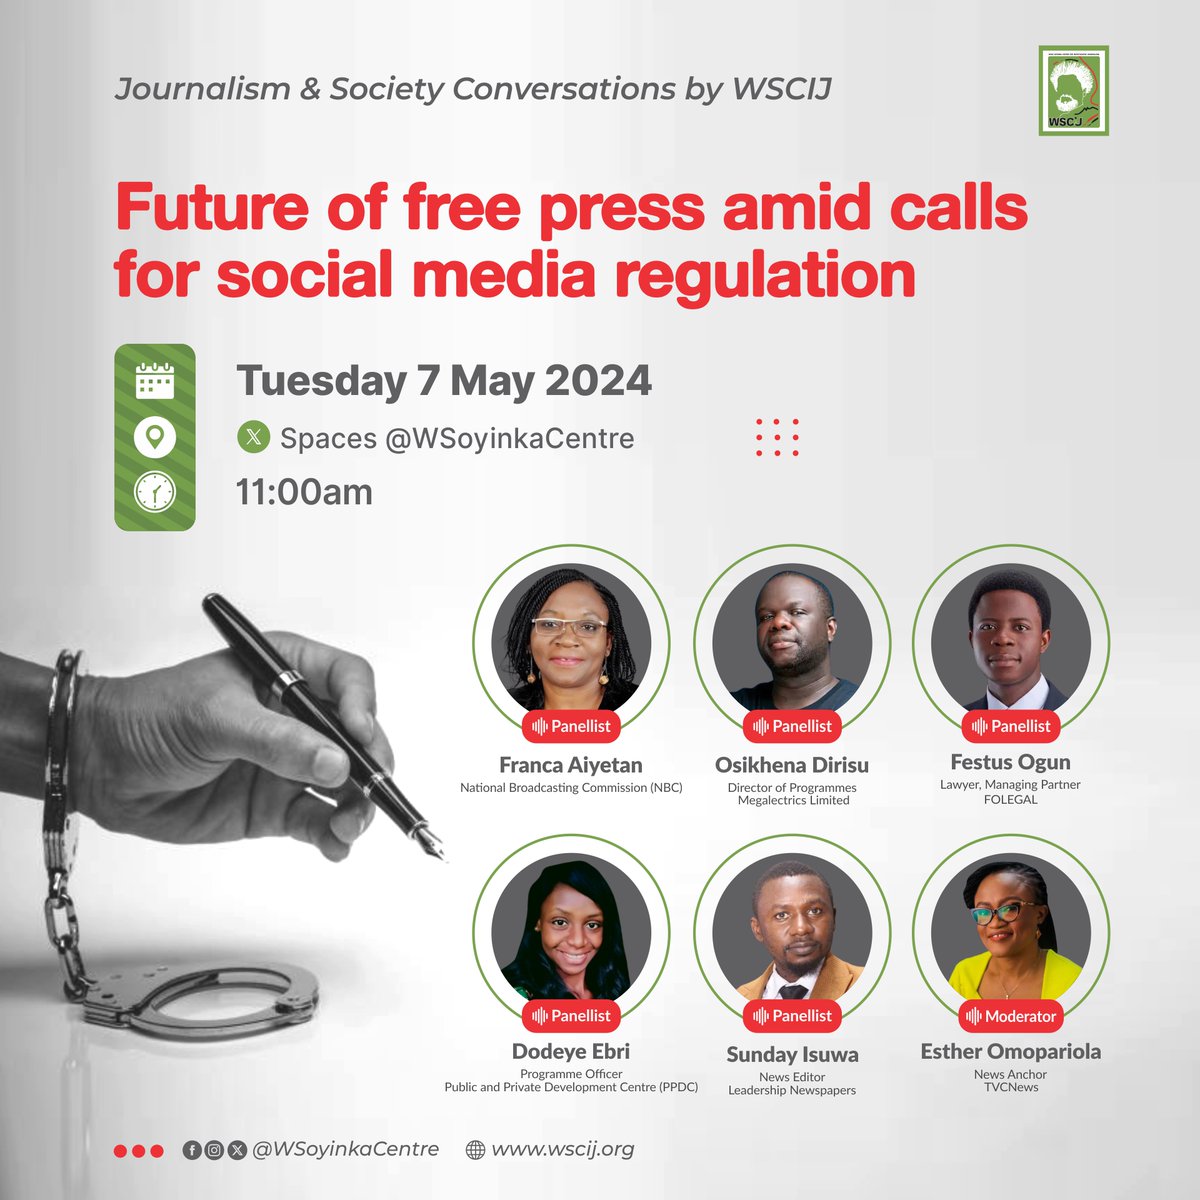 Join us at 11:00 am as we discuss 'Future of free press amid calls for social media regulation.' Discussions will be on the need to protect freedom of the press amid the growing calls for regulation of social media platforms. Click here to participate: bit.ly/3UKrdsY